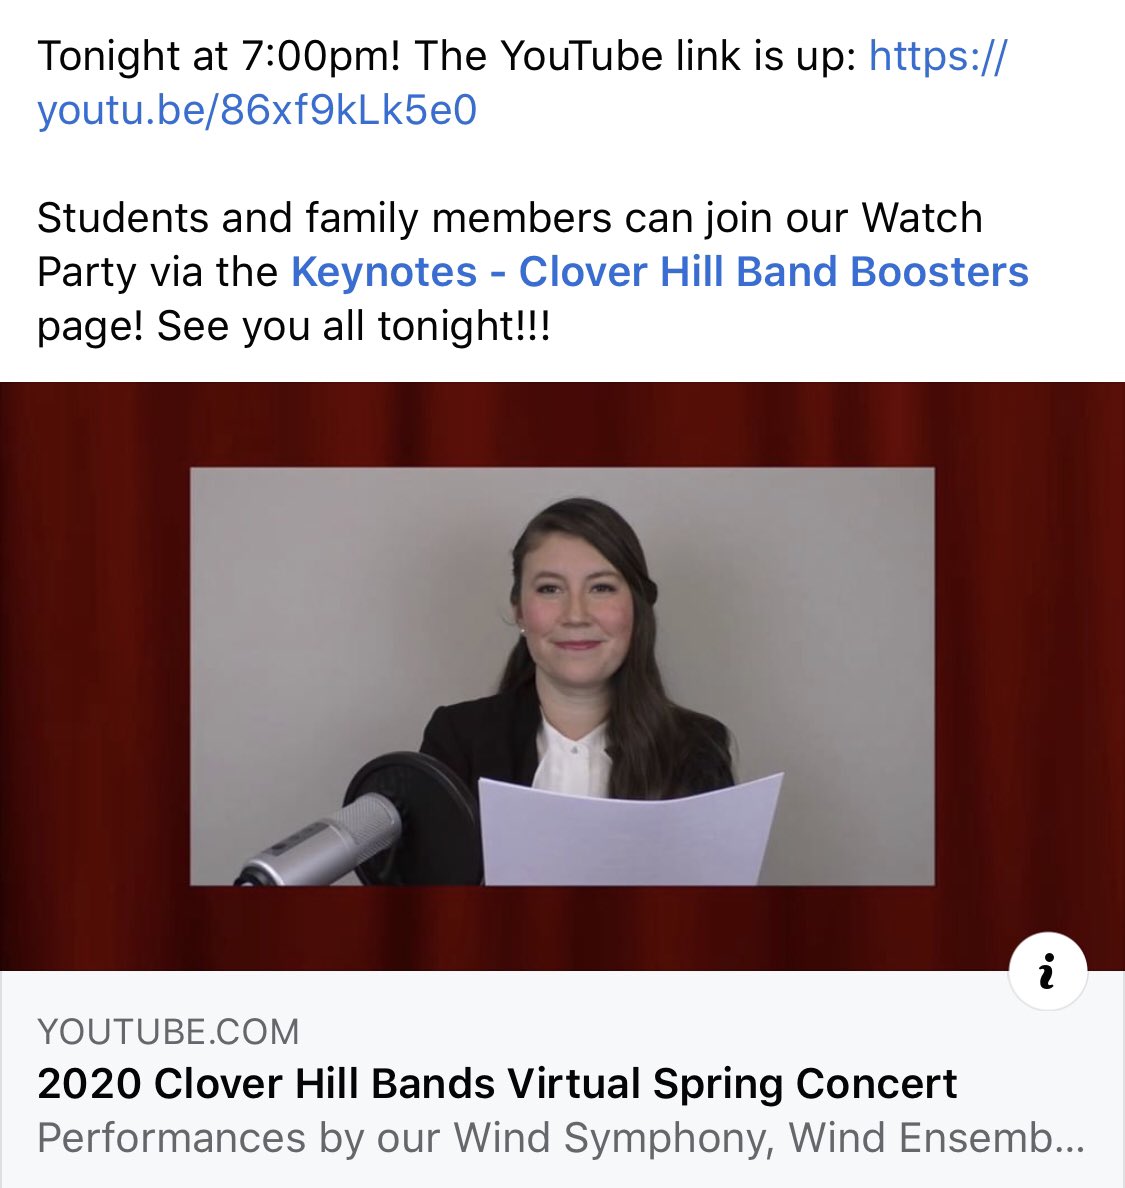 Our virtual spring concert is tonight at 7:00pm! The YouTube link is up: youtu.be/86xf9kLk5e0 Students and family members can join our Watch Party via the Keynotes - Clover Hill Band Boosters page! See you all tonight!!! #CHHSbands @cloverhillhs